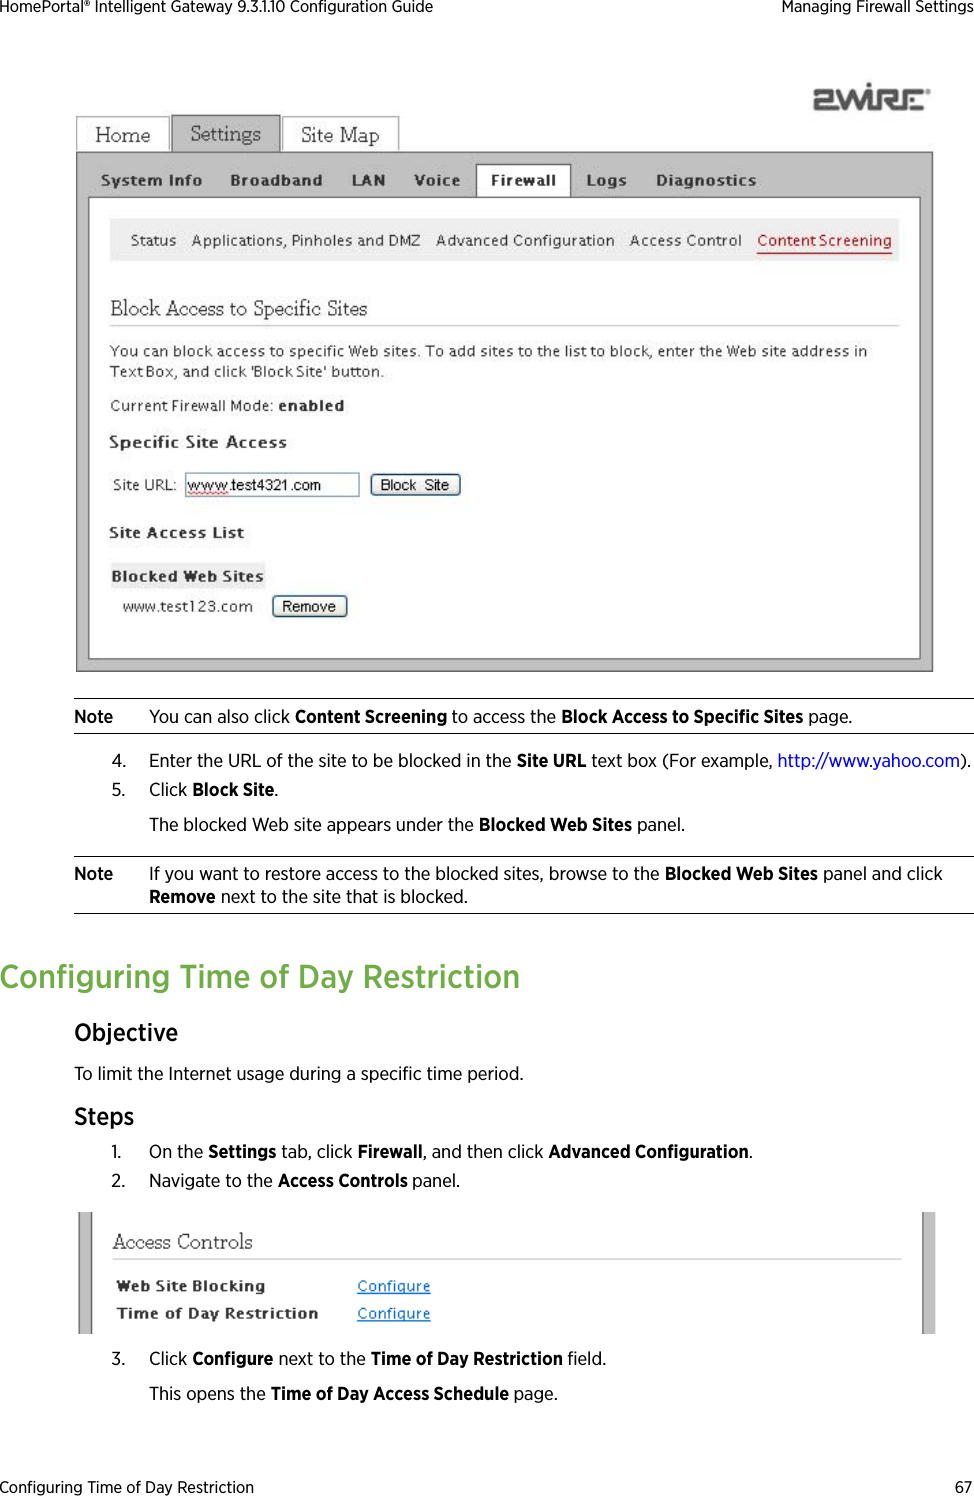 Configuring Time of Day Restriction 67HomePortal® Intelligent Gateway 9.3.1.10 Configuration Guide Managing Firewall SettingsNote You can also click Content Screening to access the Block Access to Specific Sites page.4. Enter the URL of the site to be blocked in the Site URL text box (For example, http://www.yahoo.com).5. Click Block Site. The blocked Web site appears under the Blocked Web Sites panel.Note If you want to restore access to the blocked sites, browse to the Blocked Web Sites panel and click Remove next to the site that is blocked.Configuring Time of Day RestrictionObjectiveTo limit the Internet usage during a specific time period.Steps1. On the Settings tab, click Firewall, and then click Advanced Configuration.2. Navigate to the Access Controls panel.3. Click Configure next to the Time of Day Restriction field. This opens the Time of Day Access Schedule page.